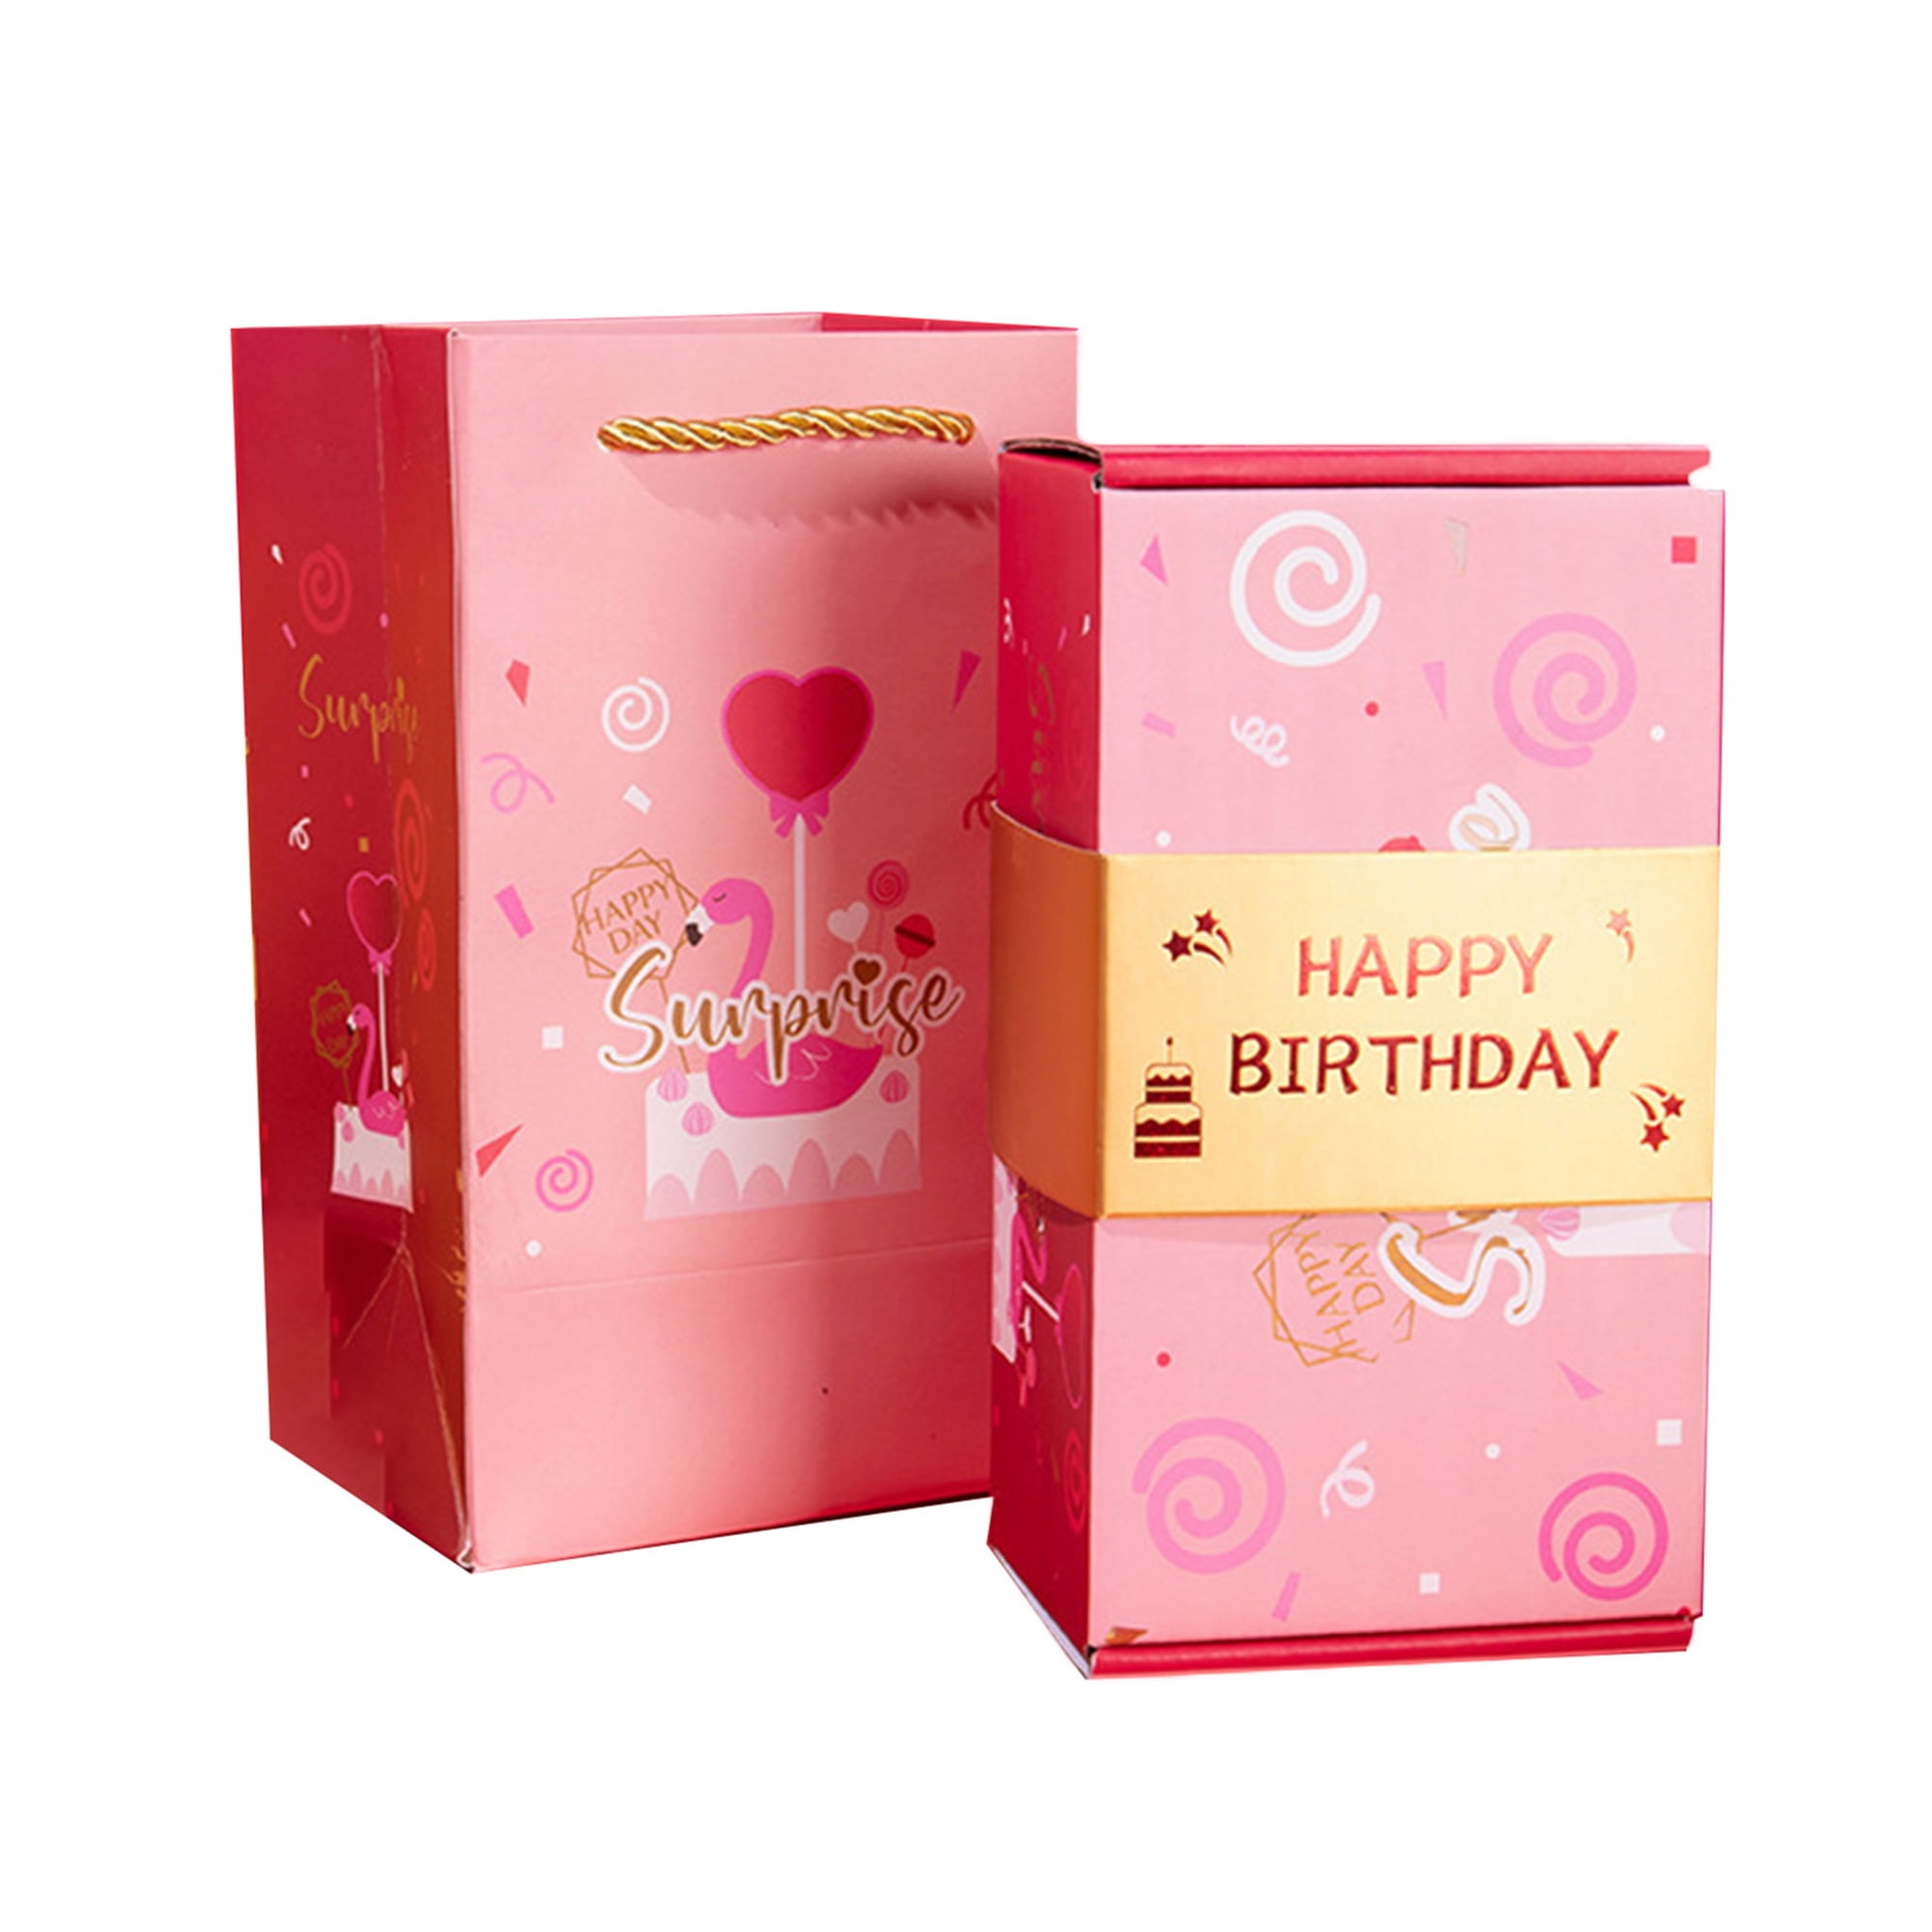 Surprise Gift Box Explosion Birthday Surprise Gift Boxes,Folding